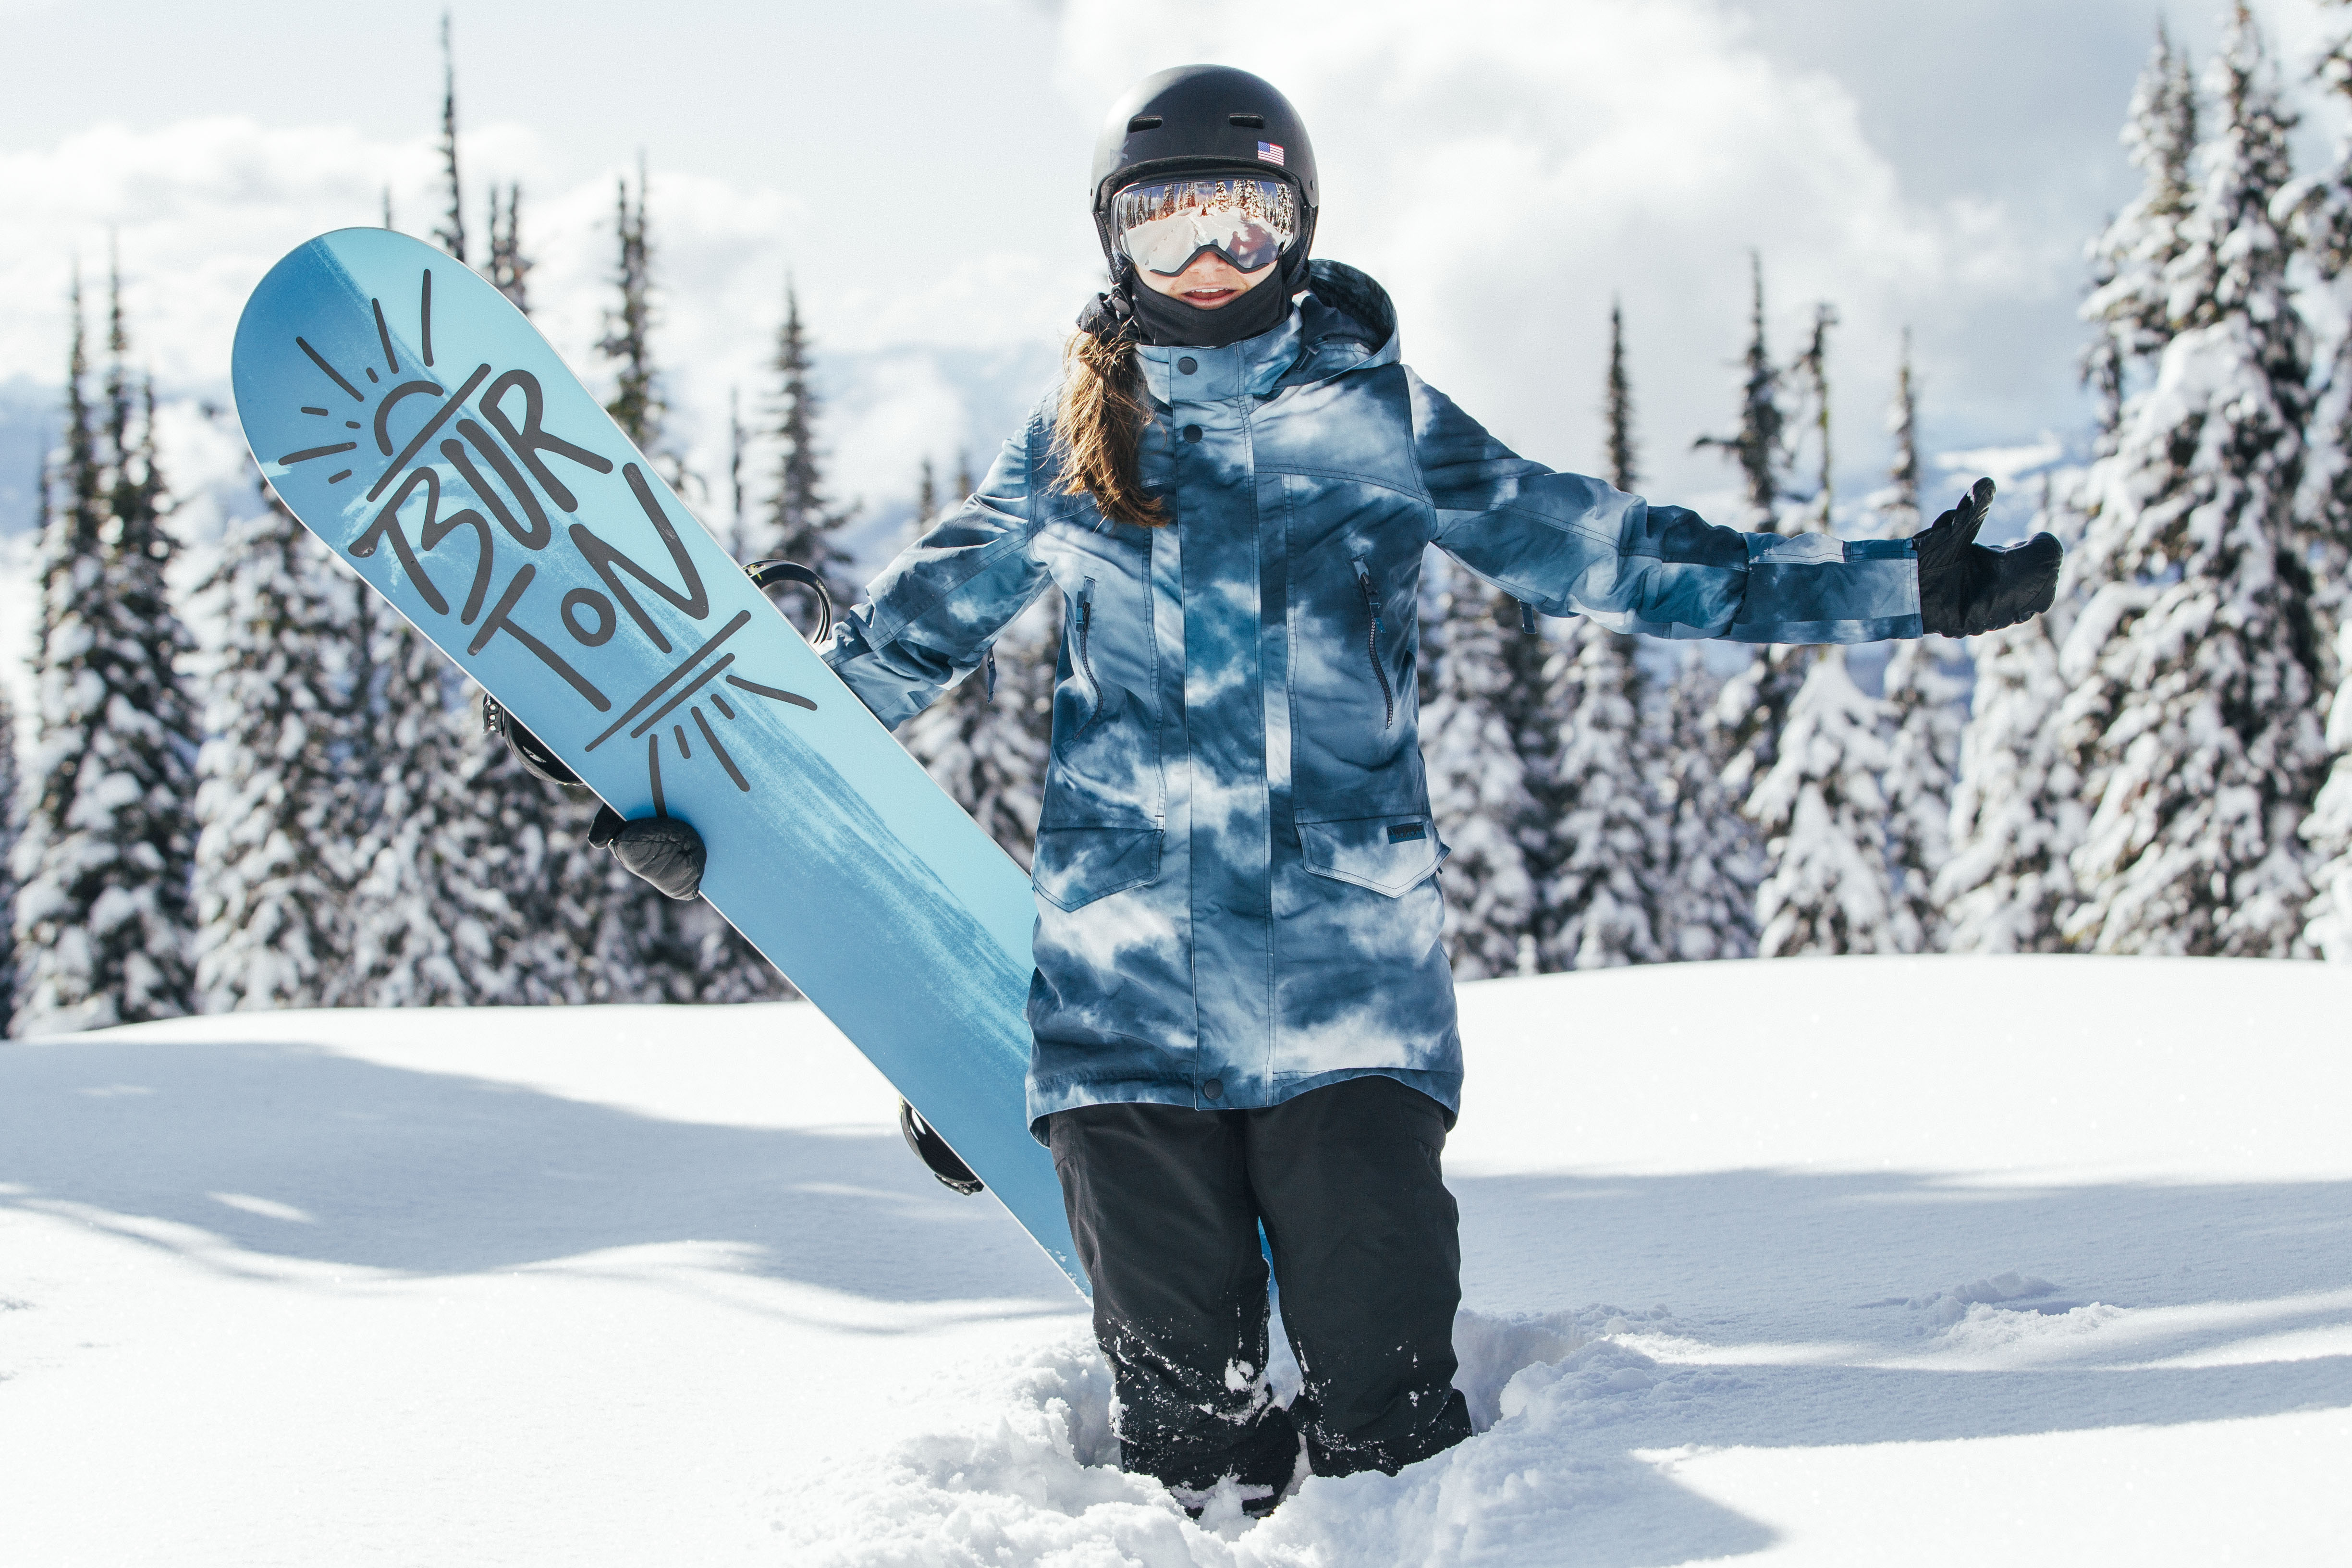 7 Badass Women Who Changed Snowboarding Forever in How To Snowboard With Style